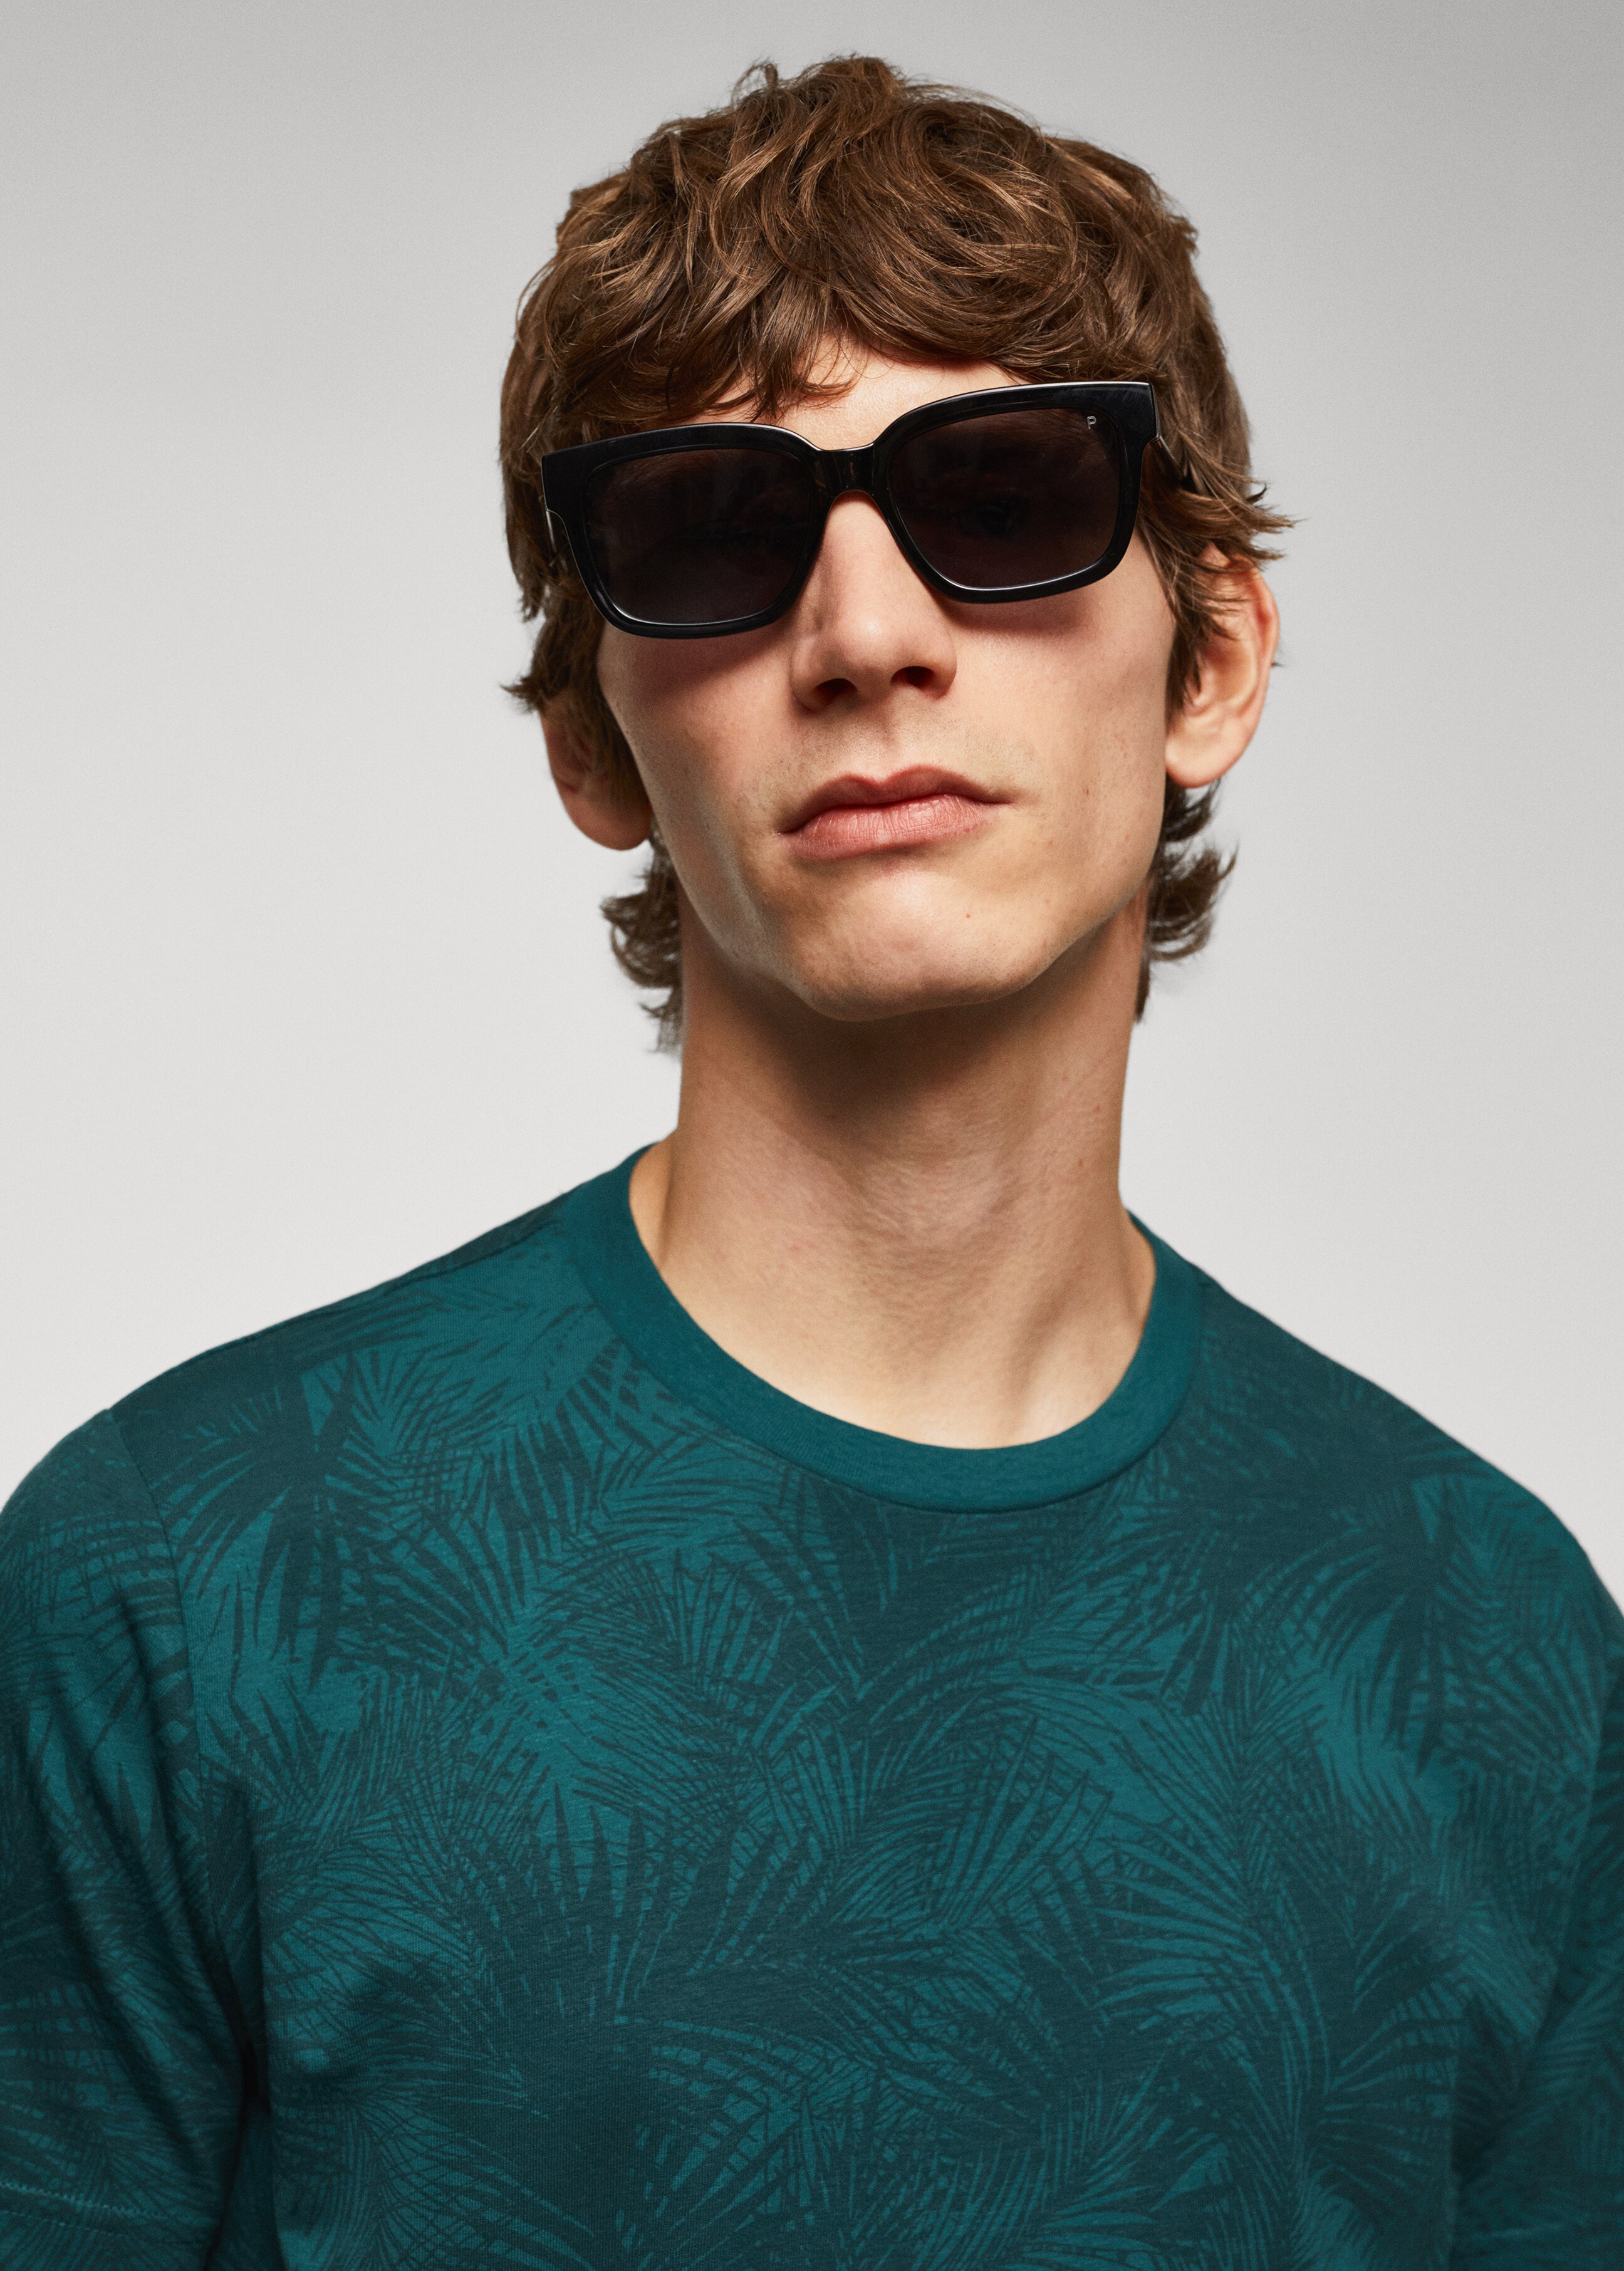 Hawaiian printed cotton t-shirt - Details of the article 1